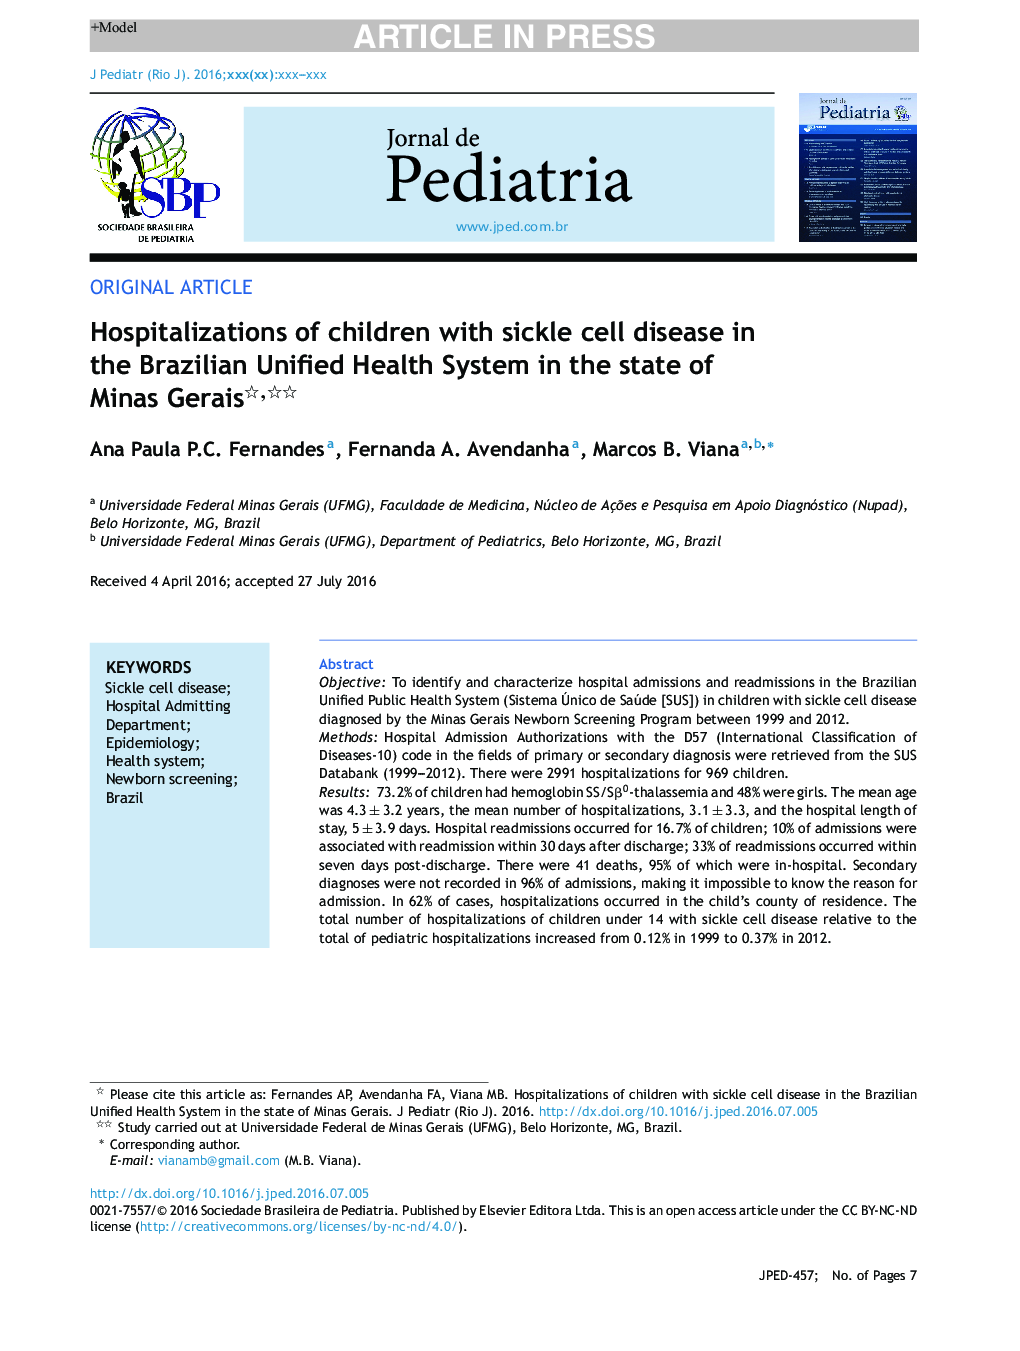 Hospitalizations of children with sickle cell disease in the Brazilian Unified Health System in the state of Minas Gerais